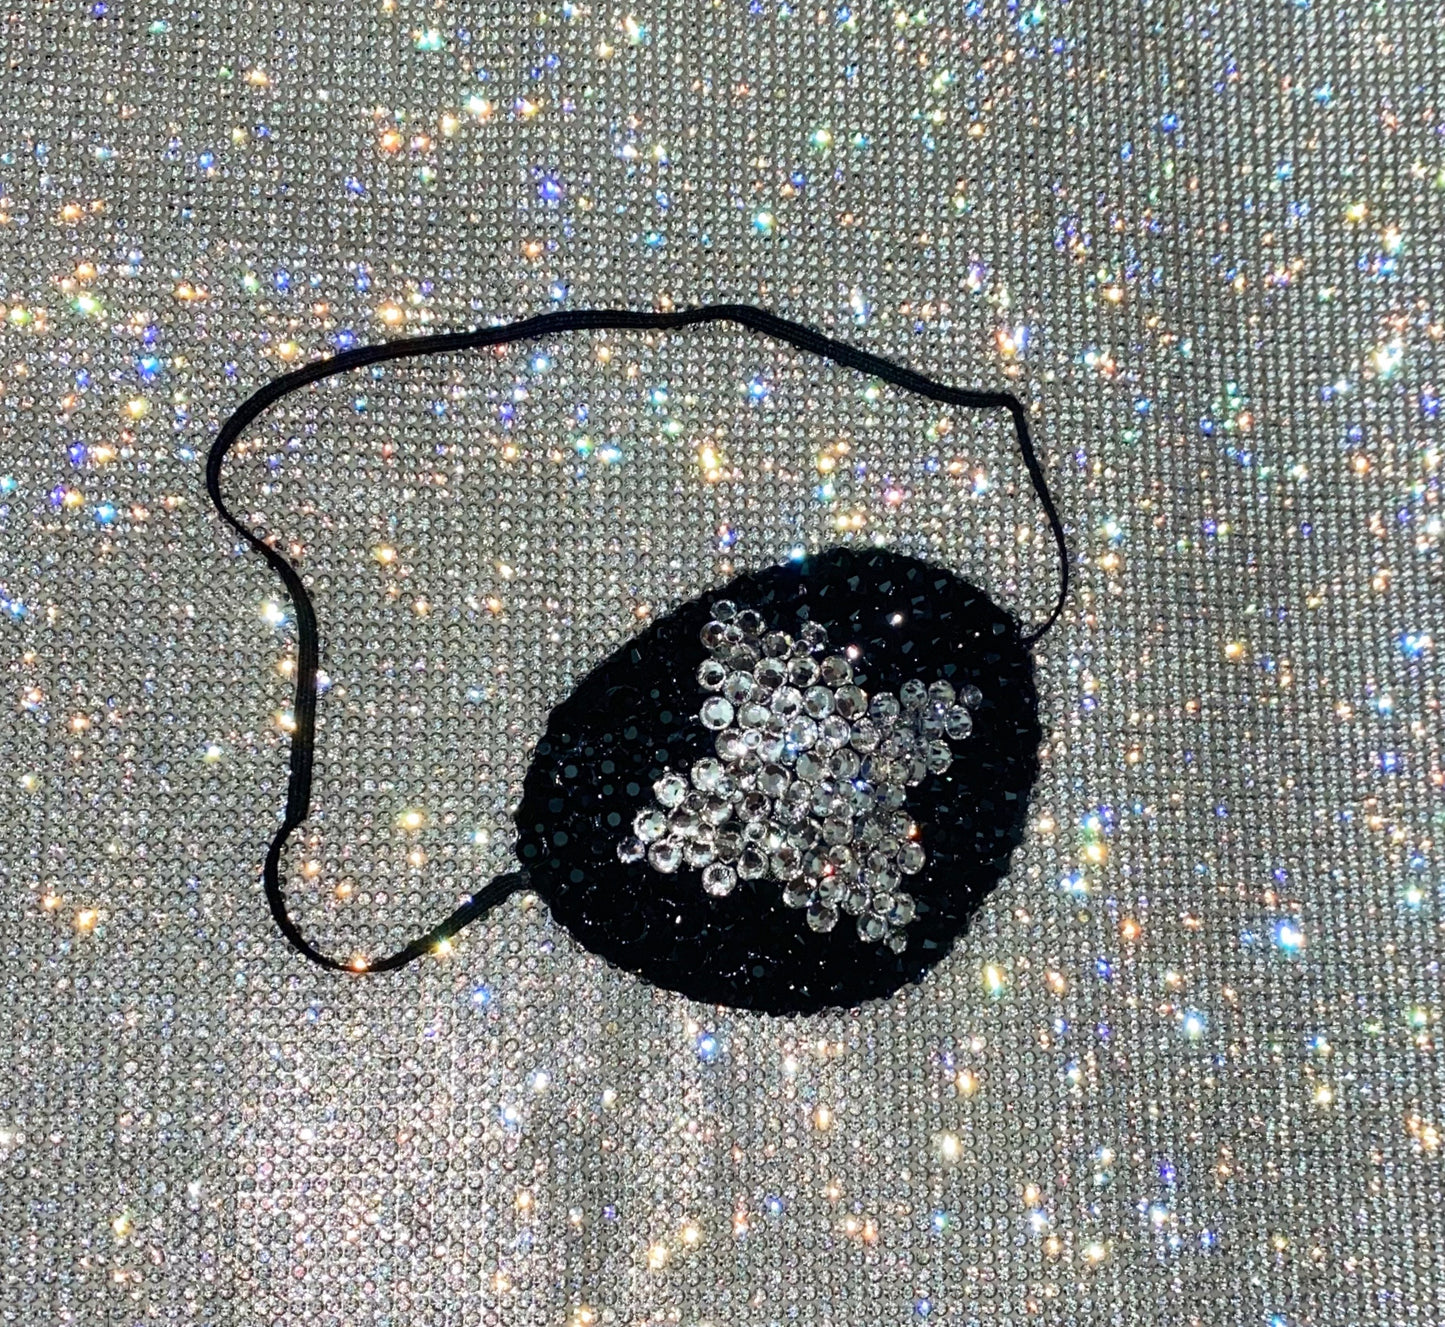 Black Eye Patch Bedazzled In Jet Black & Crystals "Cross"